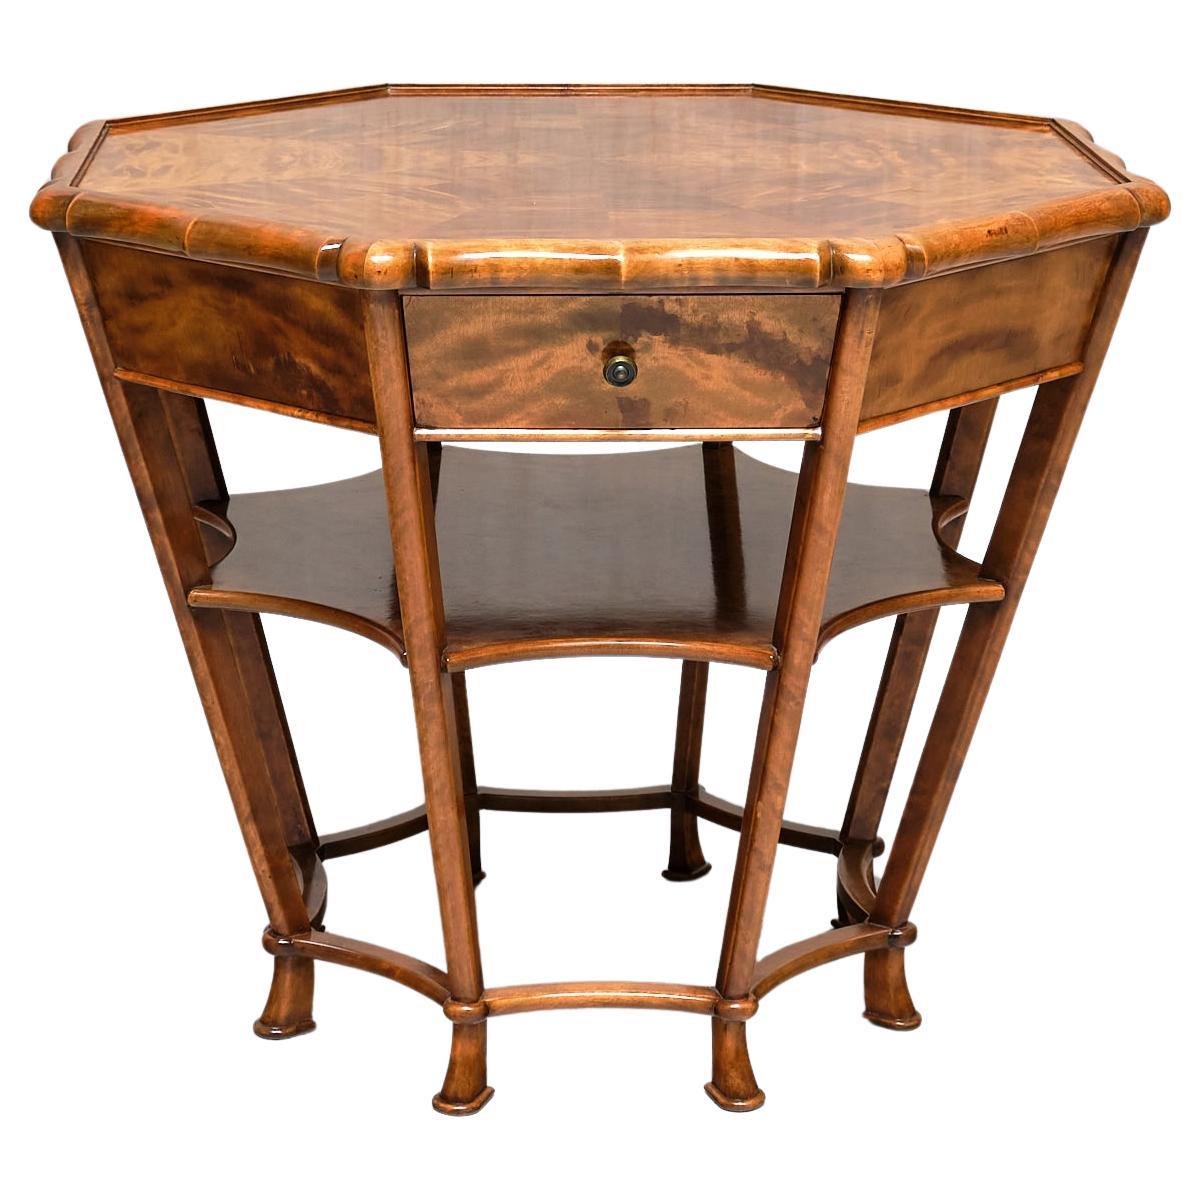 Exceptional Expressionist Octagonal Center Table in Flamed Birch, Germany, 1920s For Sale